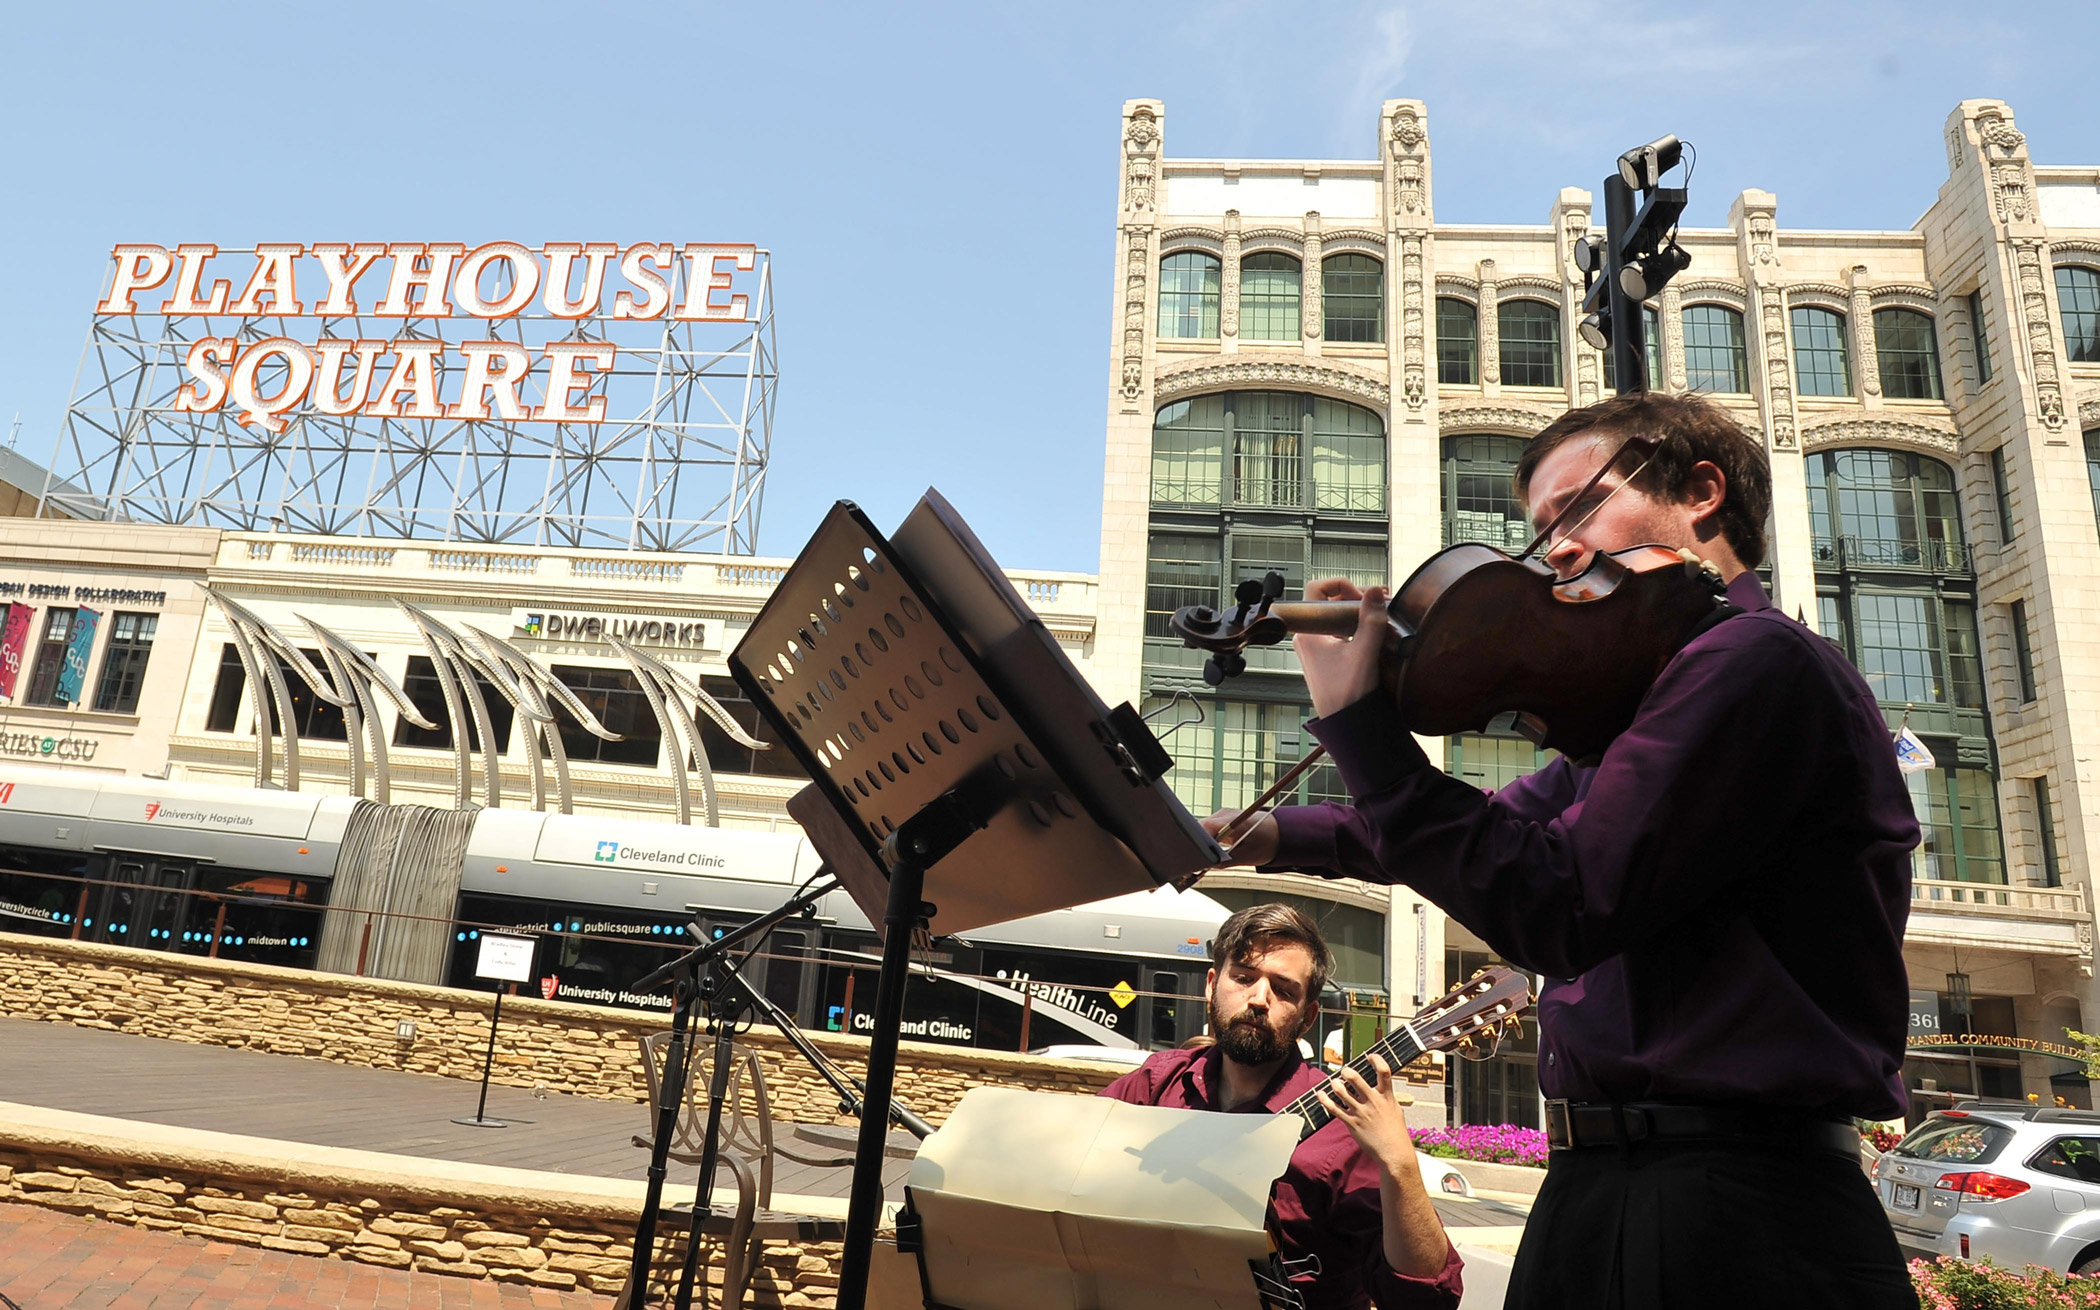 Music students perform downtown outside of playhouse square 